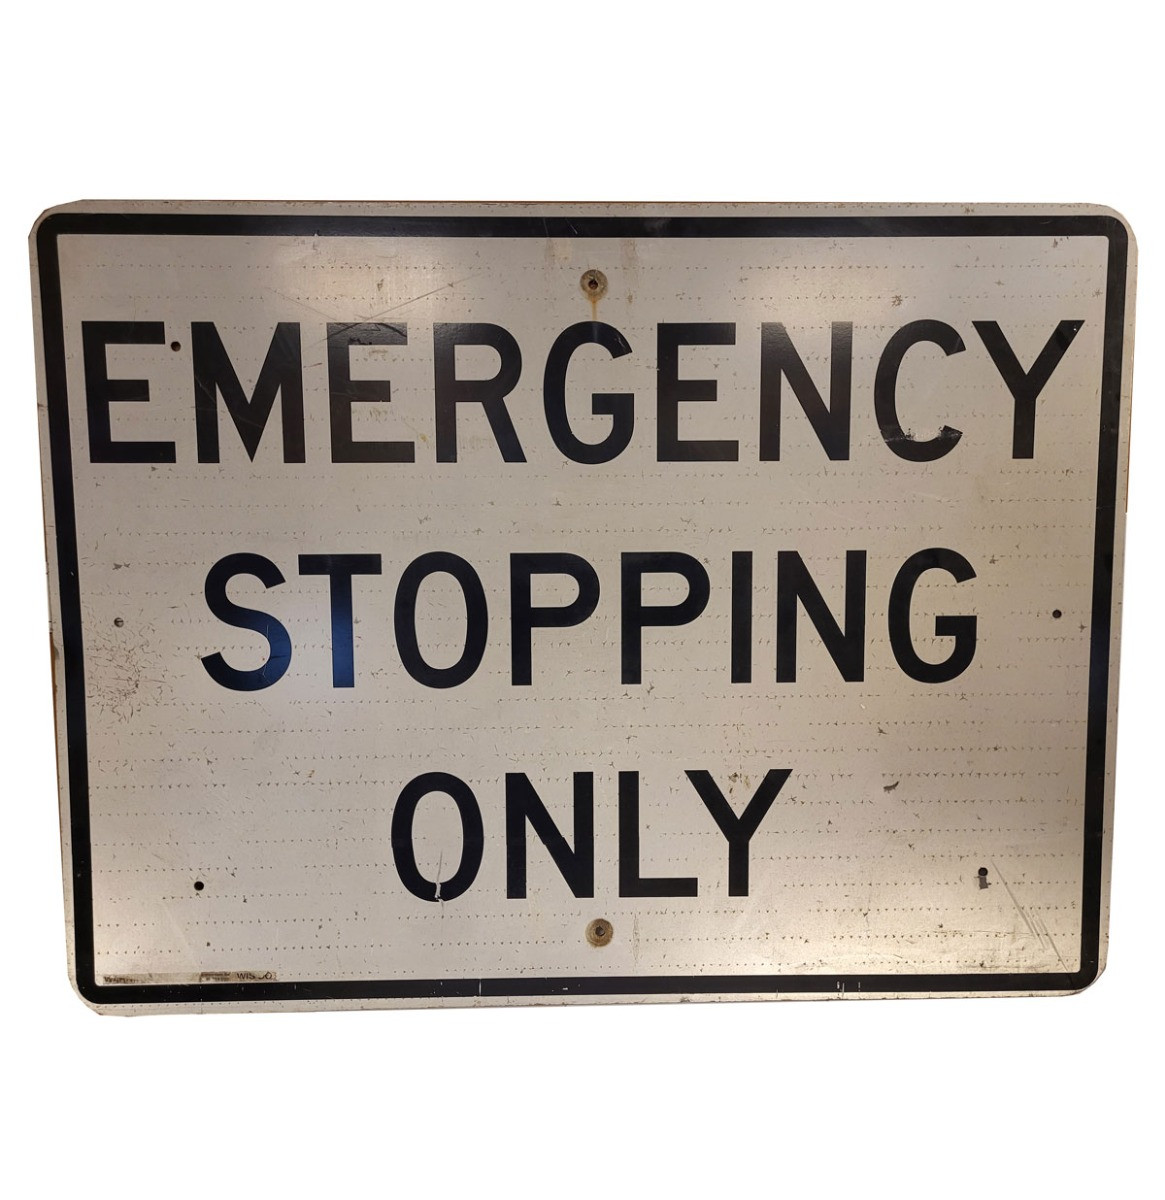 Emergency Stopping Only Metalen Straatbord - 123 x 92 cm